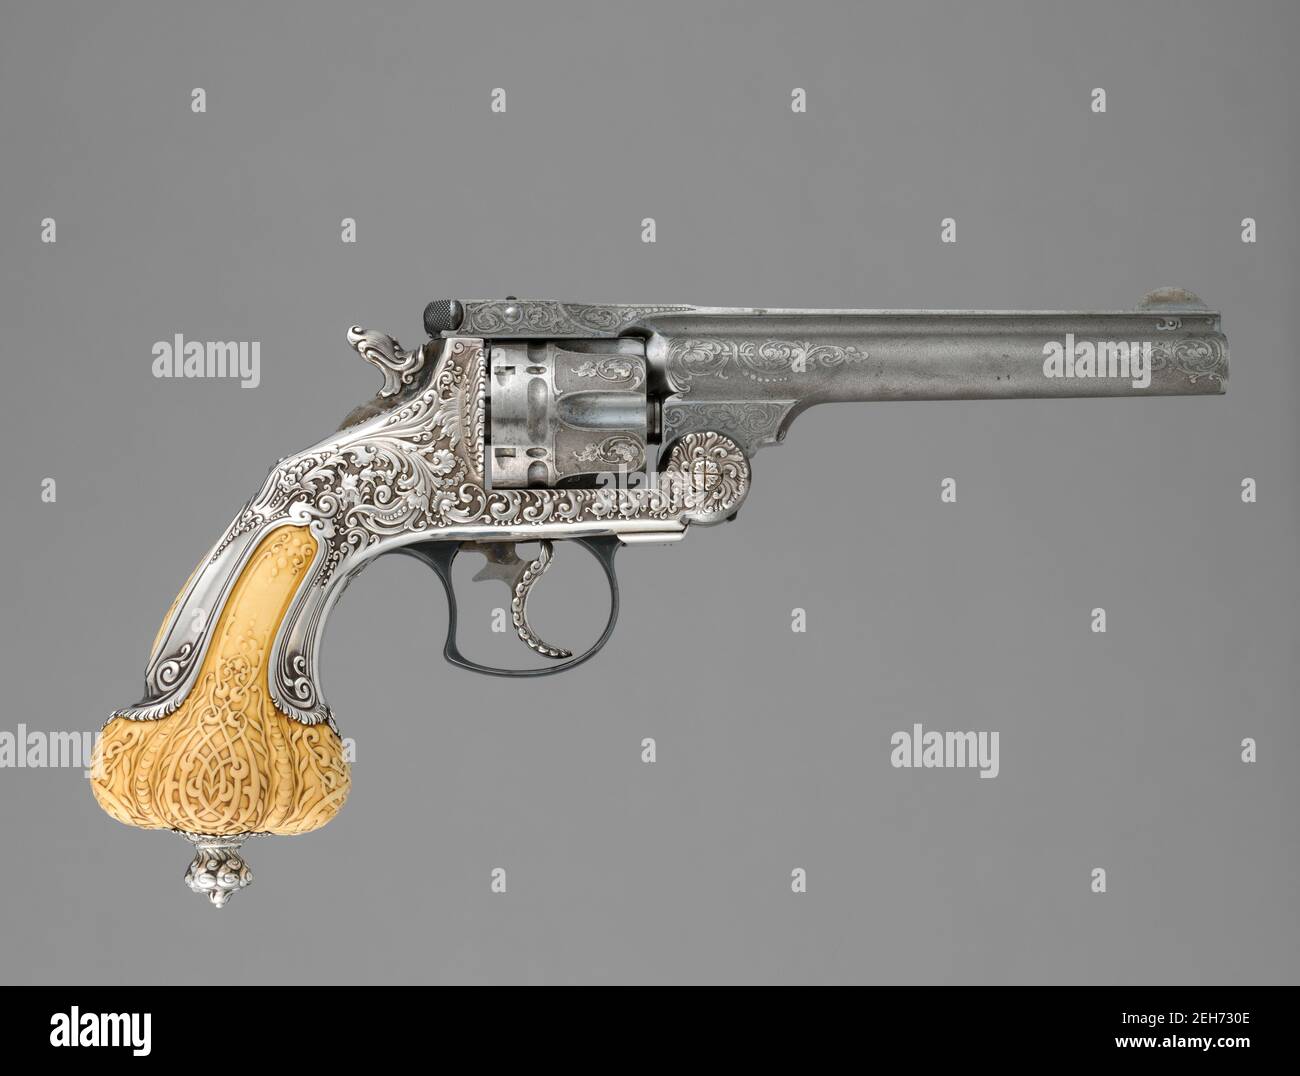 Smith &amp; Wesson .44 Double-Action Frontier Model Revolver decorated by Tiffany &amp; Co. (serial no. 8401), with Case and Cleaning Rod, American, Springfield, Massachusetts and New York, New York, ca. 1893. Stock Photo